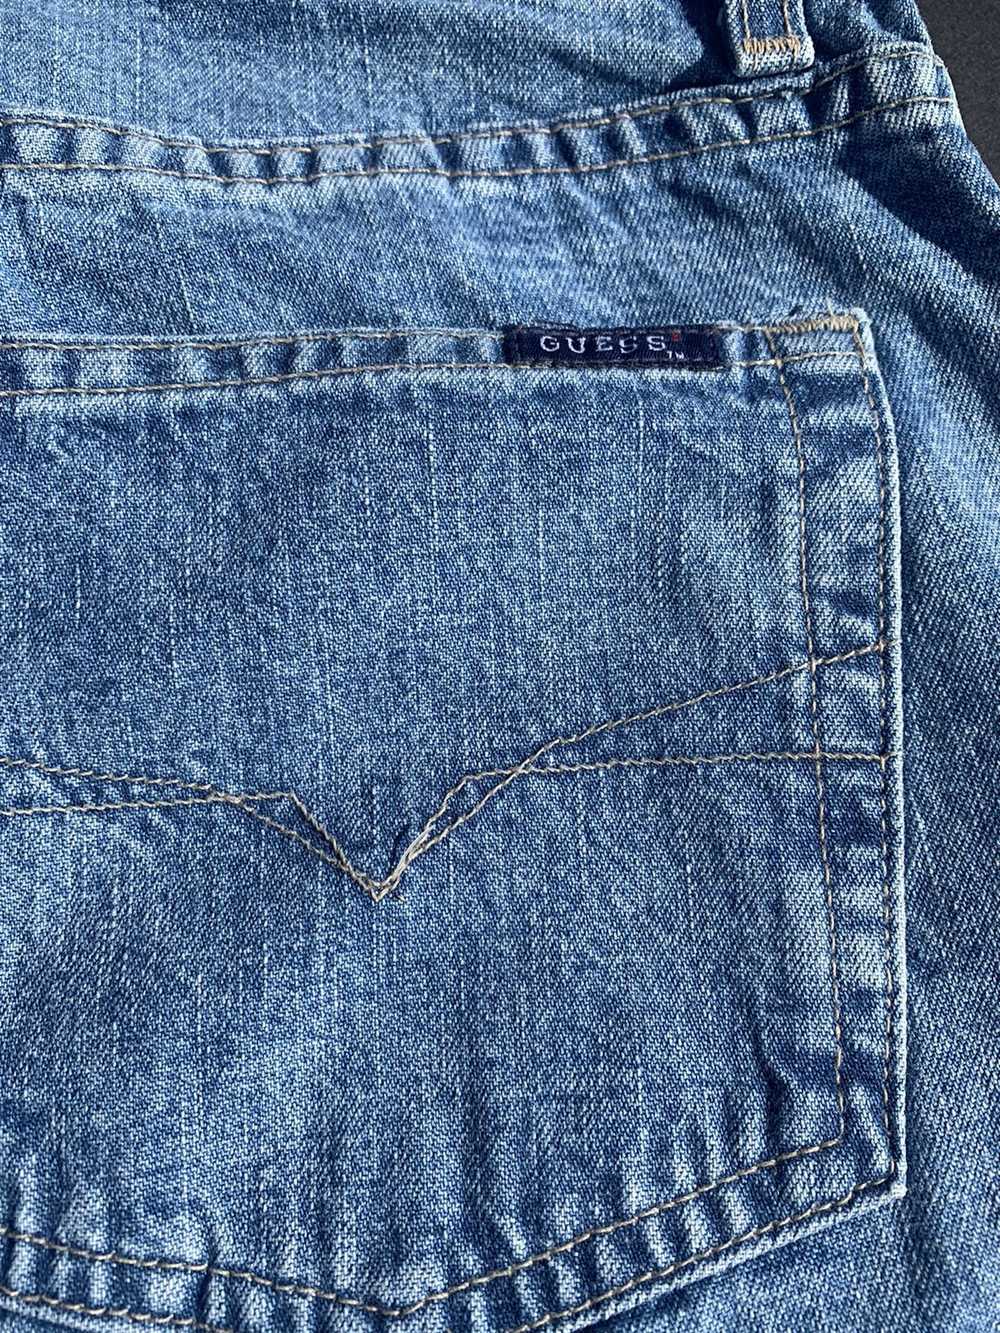 Guess Vintage guess denim jeans 90s made in USA - image 6